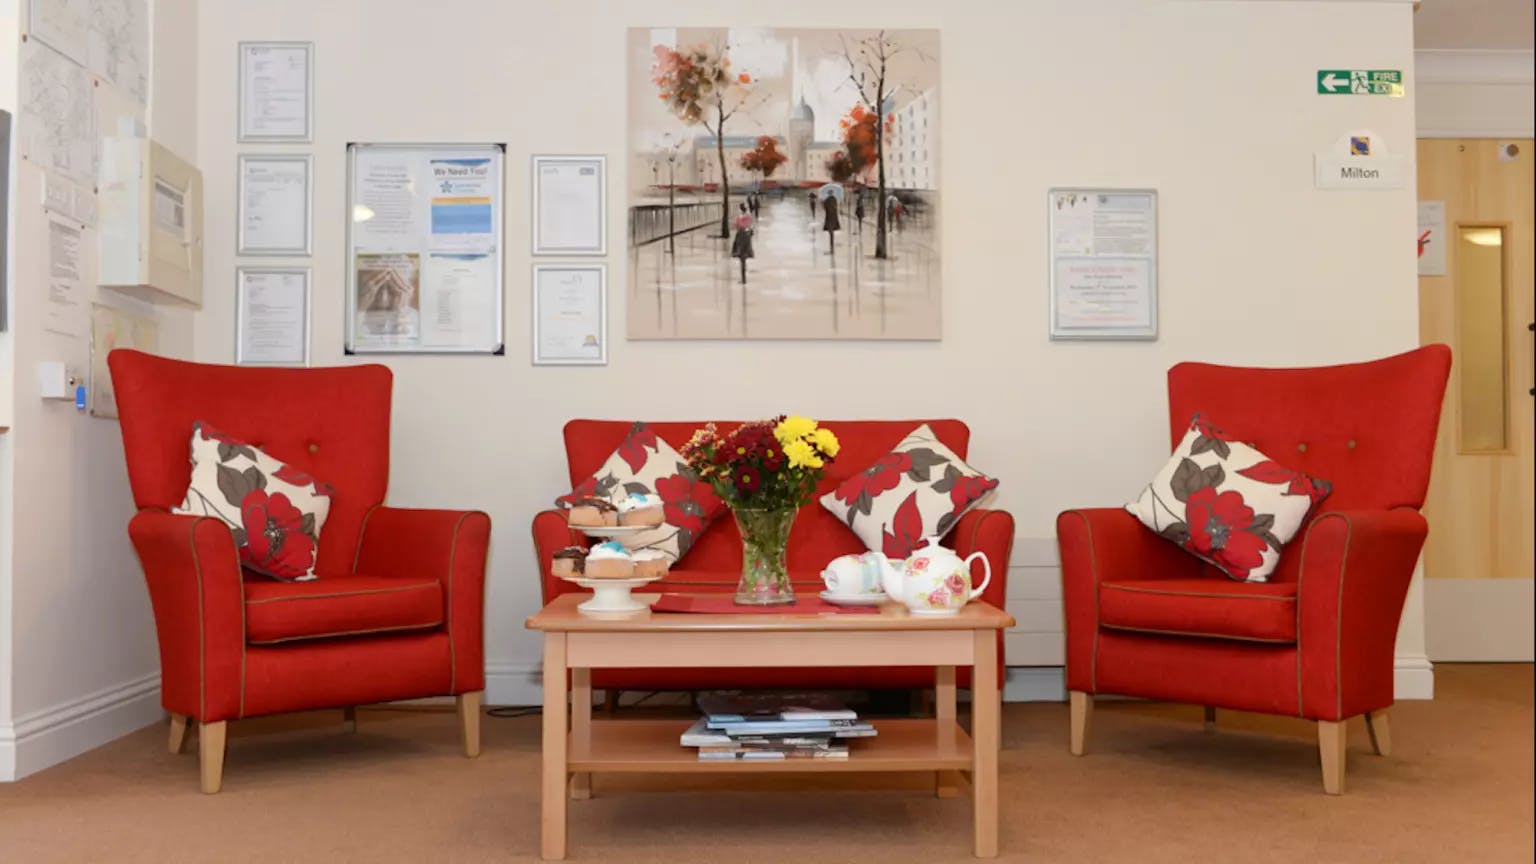 Lounge of Mayfair Lodge care home in Watkins Rise, Hertfordshire